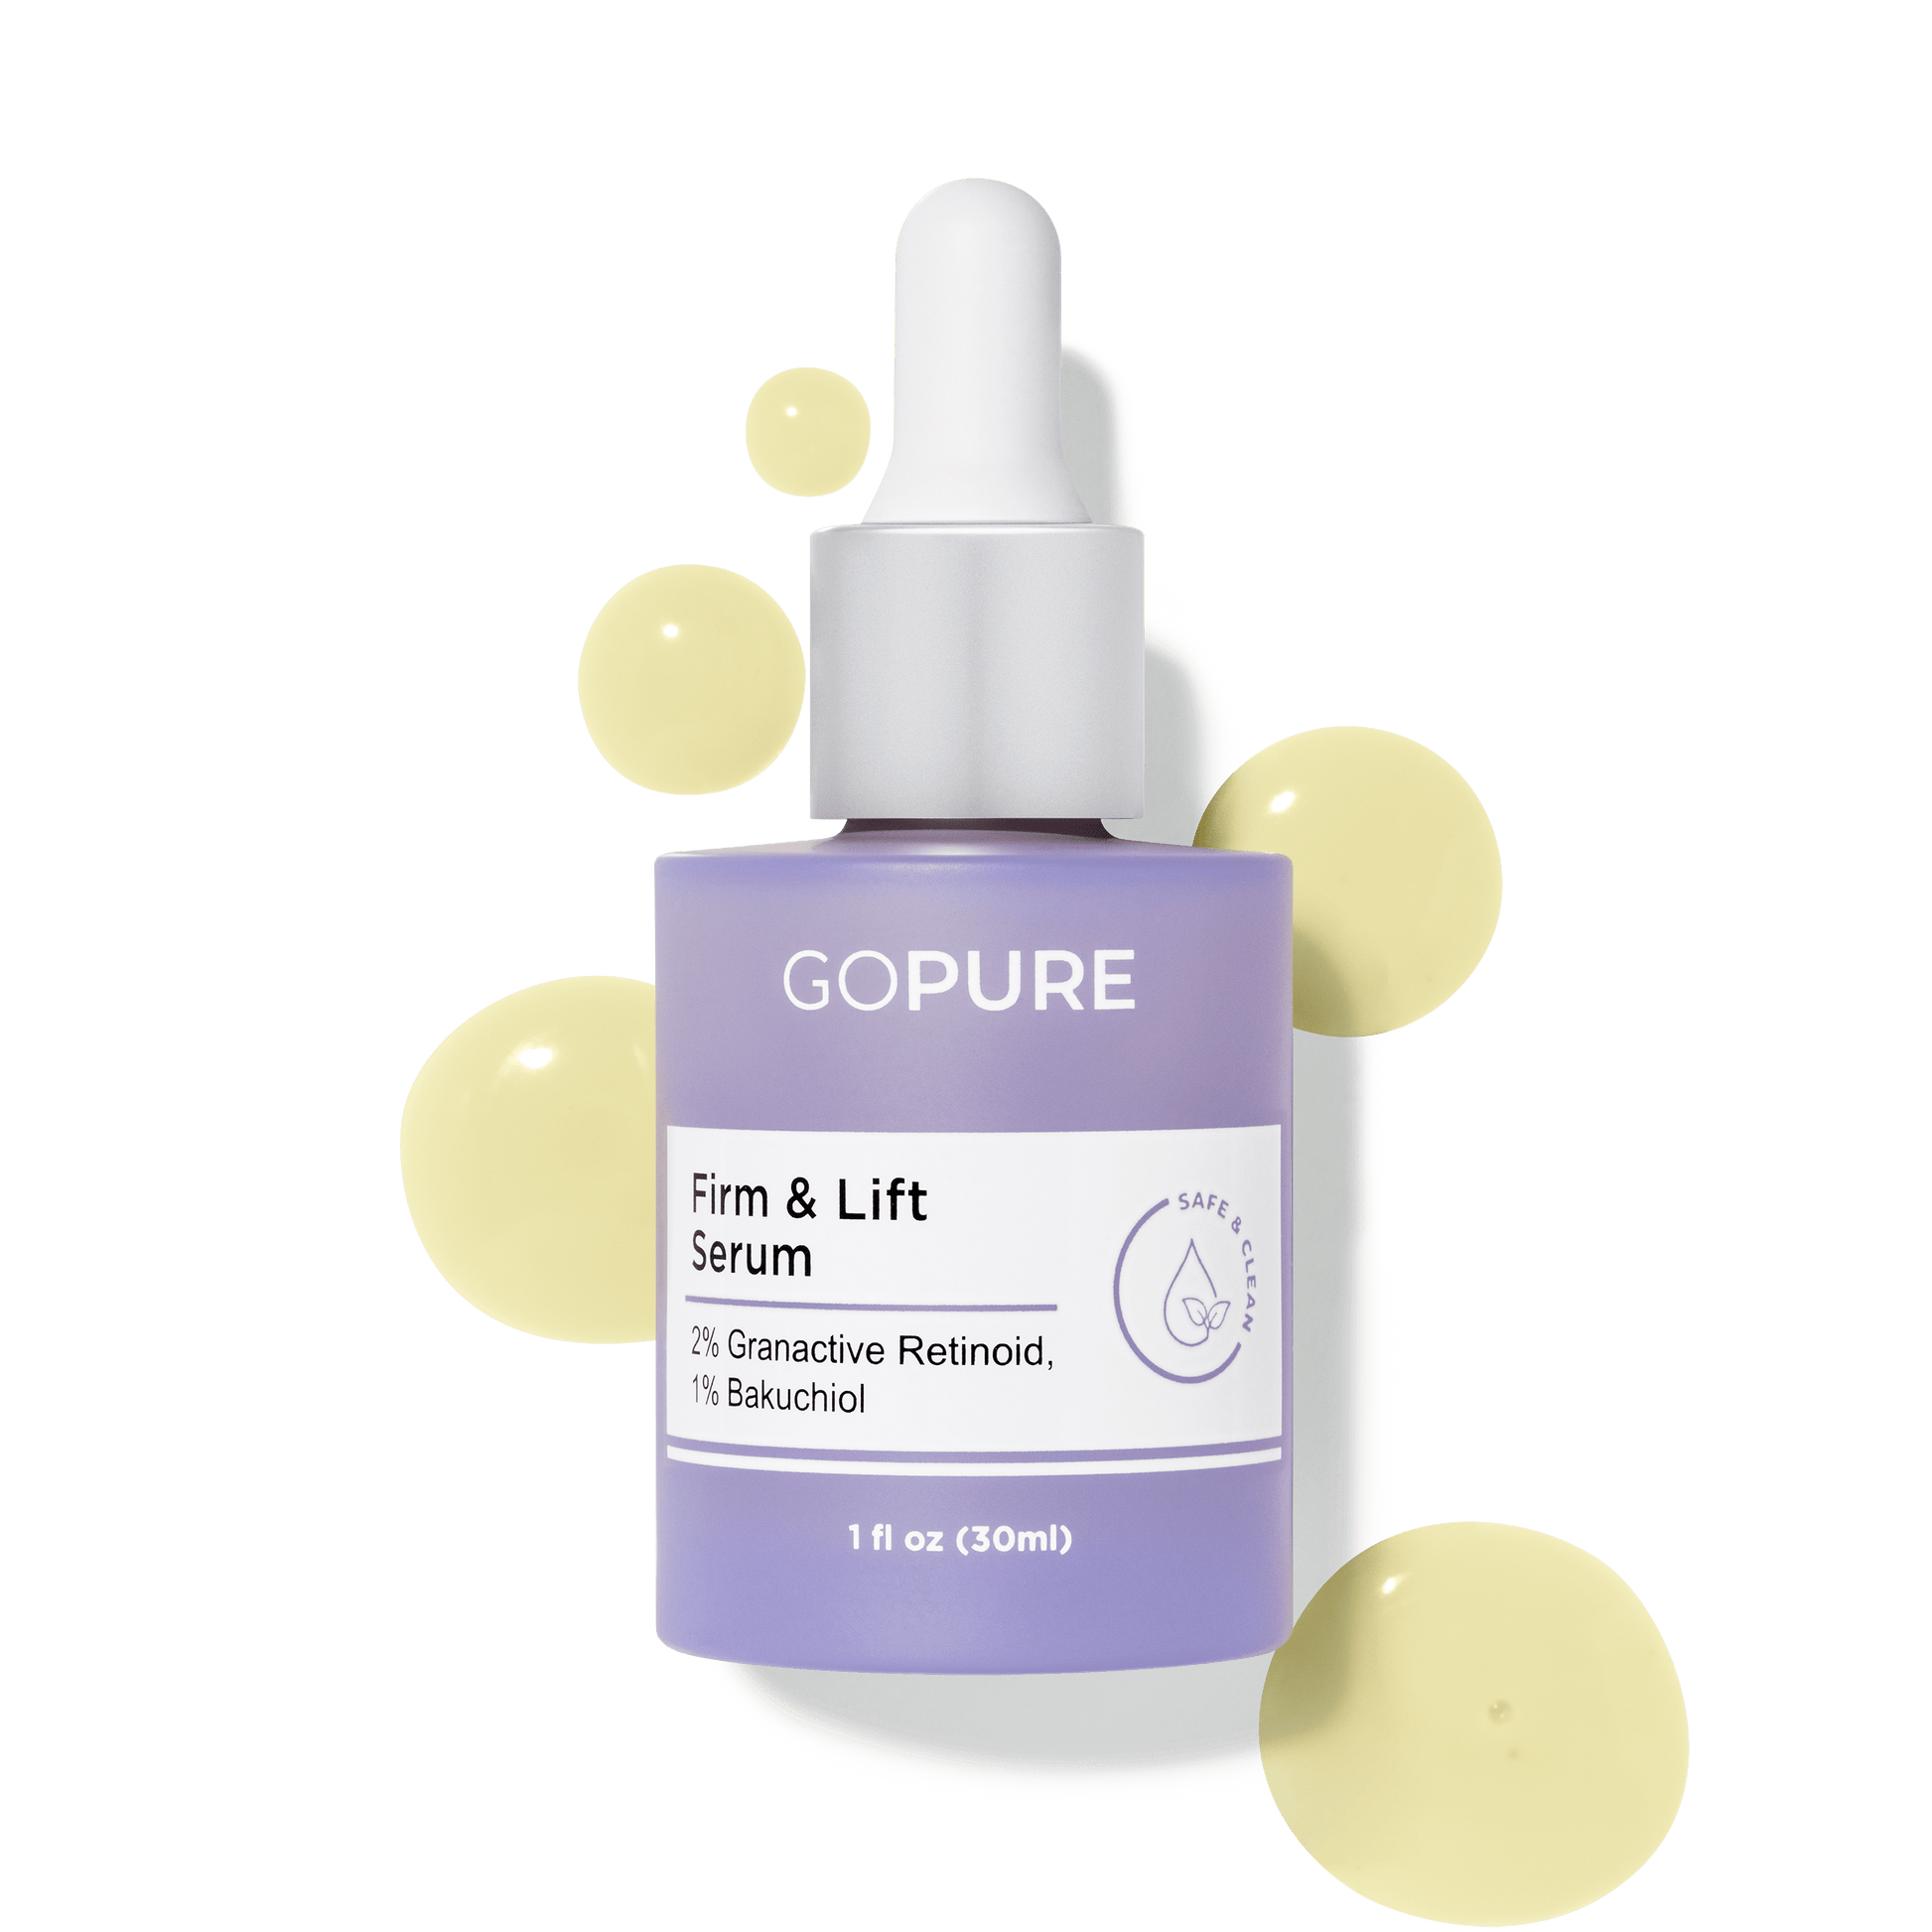 Purple bottle of GoPure's Firm & Lift Serum with visible serum droplets, containing 2% Granactive Retinoid and 1% Bakuchiol. 1 fl oz.